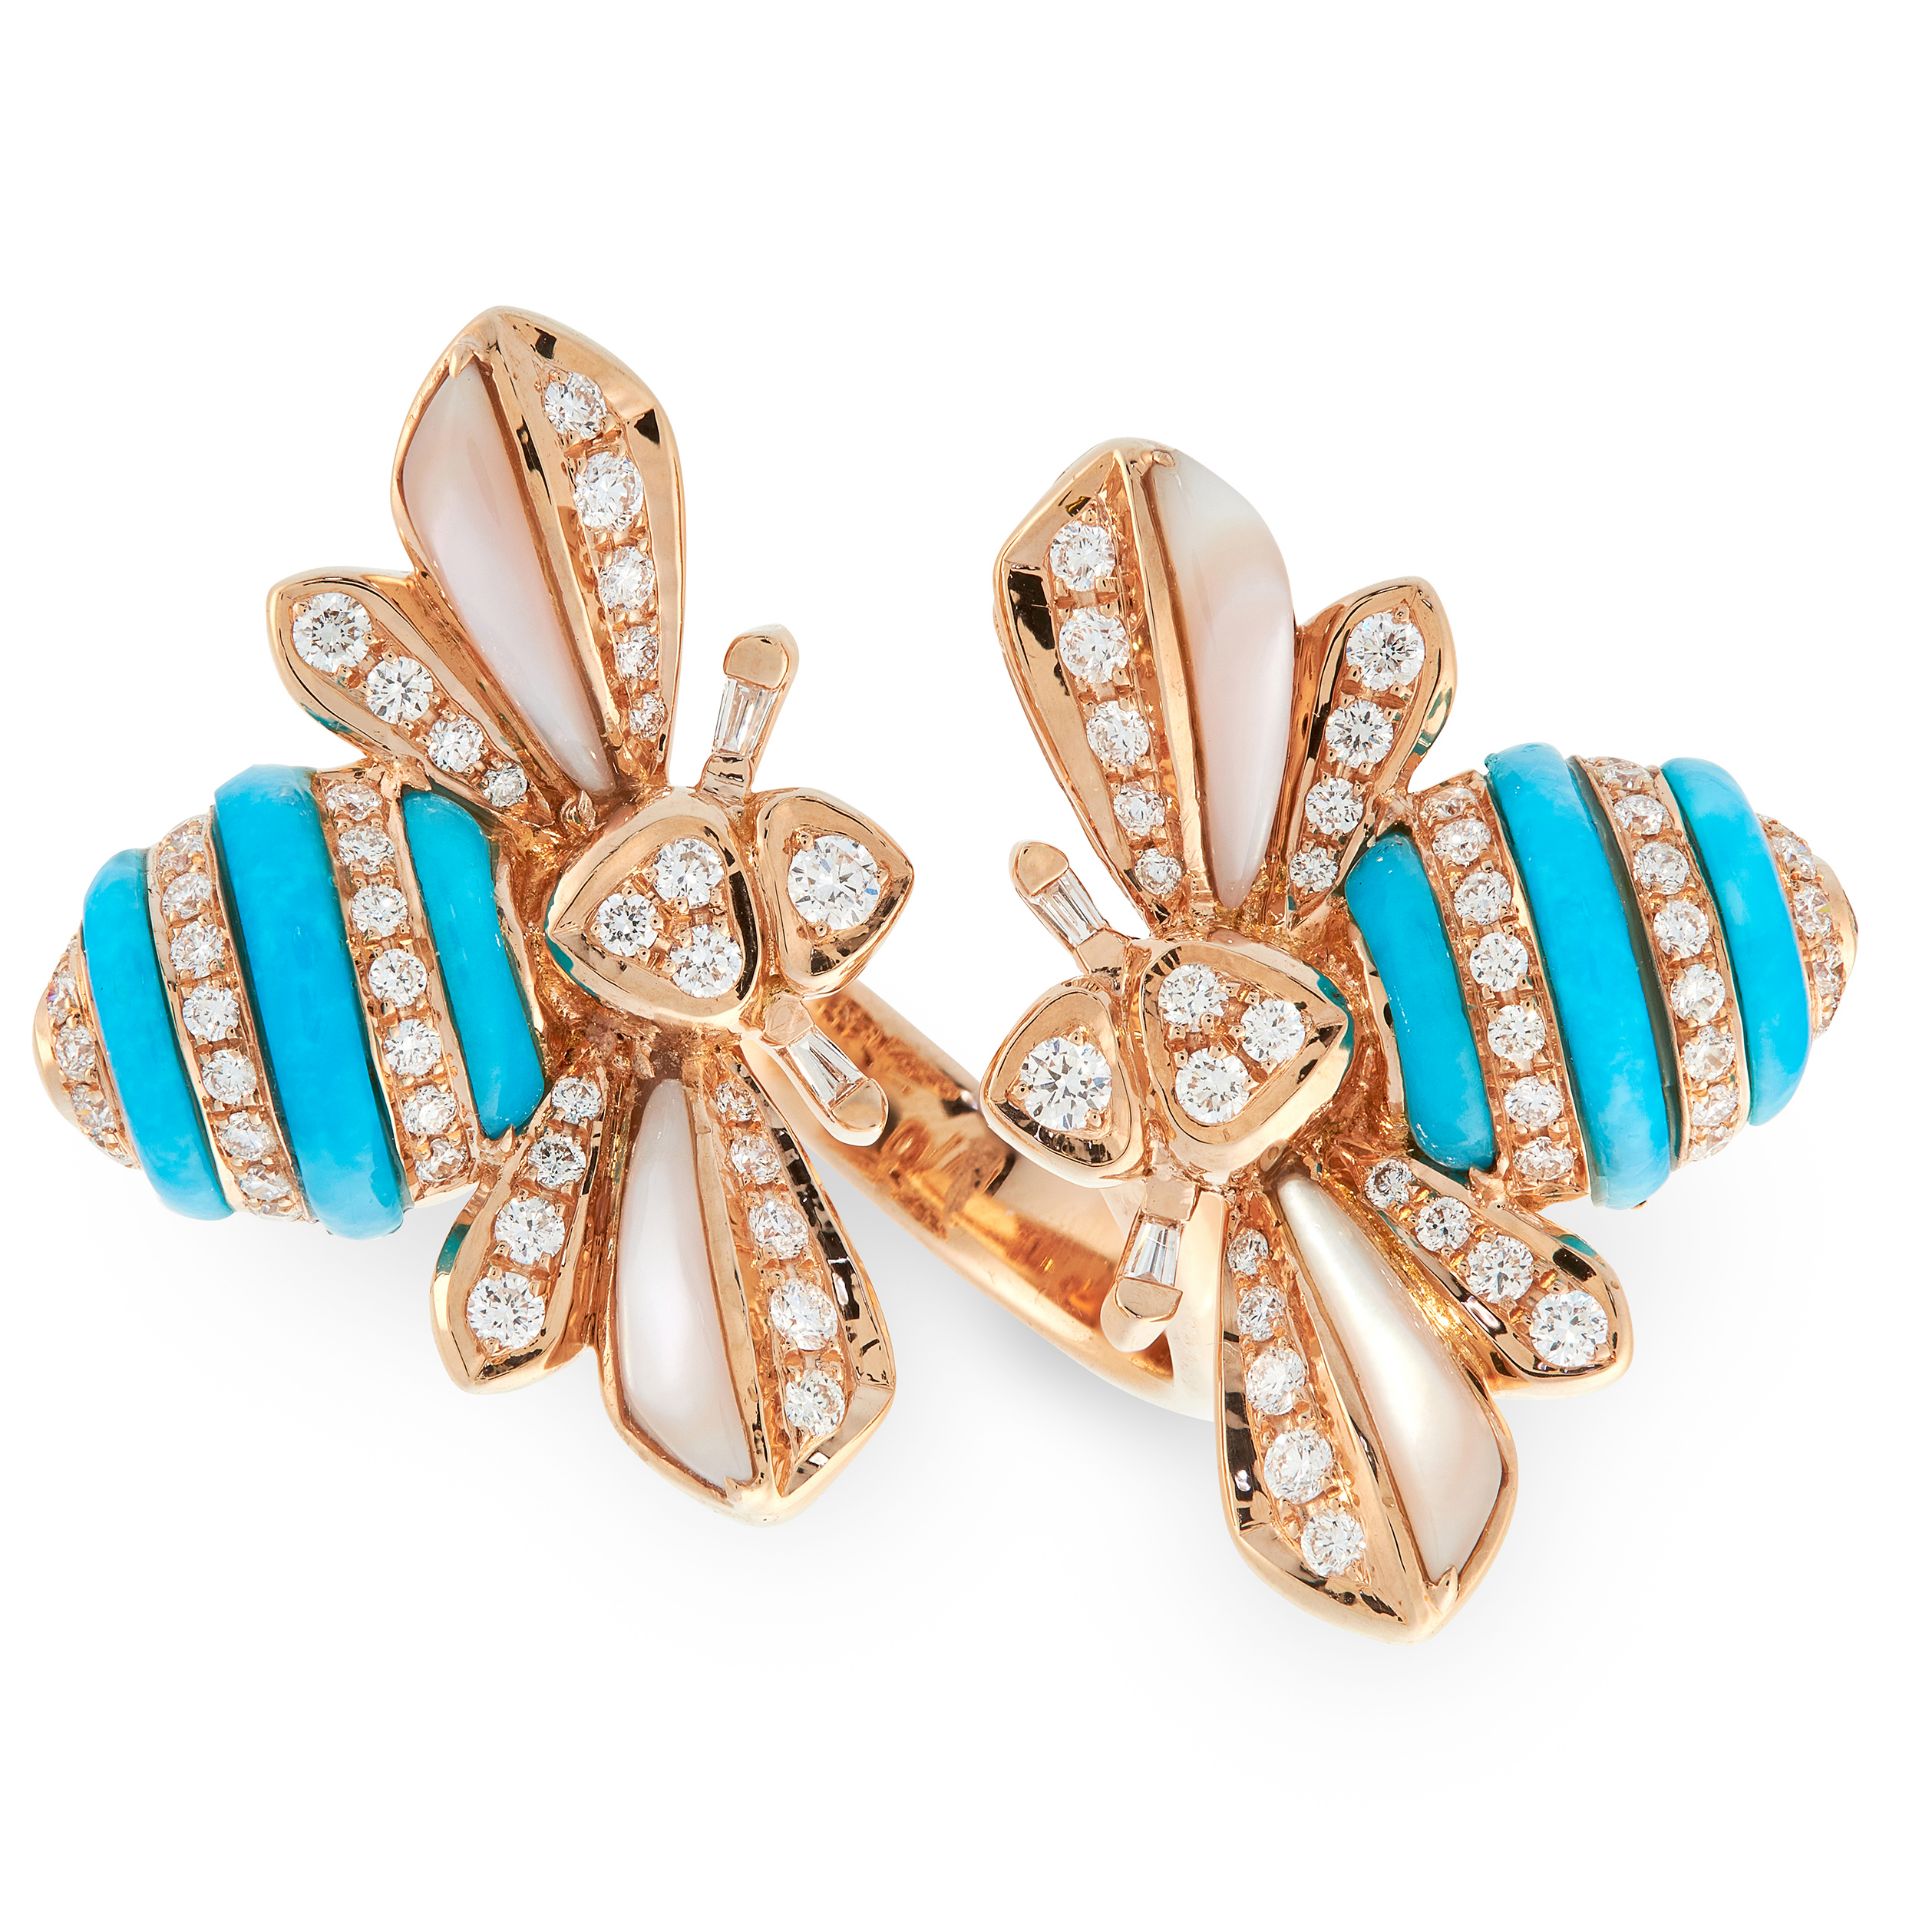 A TURQUOISE, MOTHER OF PEARL AND DIAMOND BEE RING in 18ct rose gold, the open band terminated with